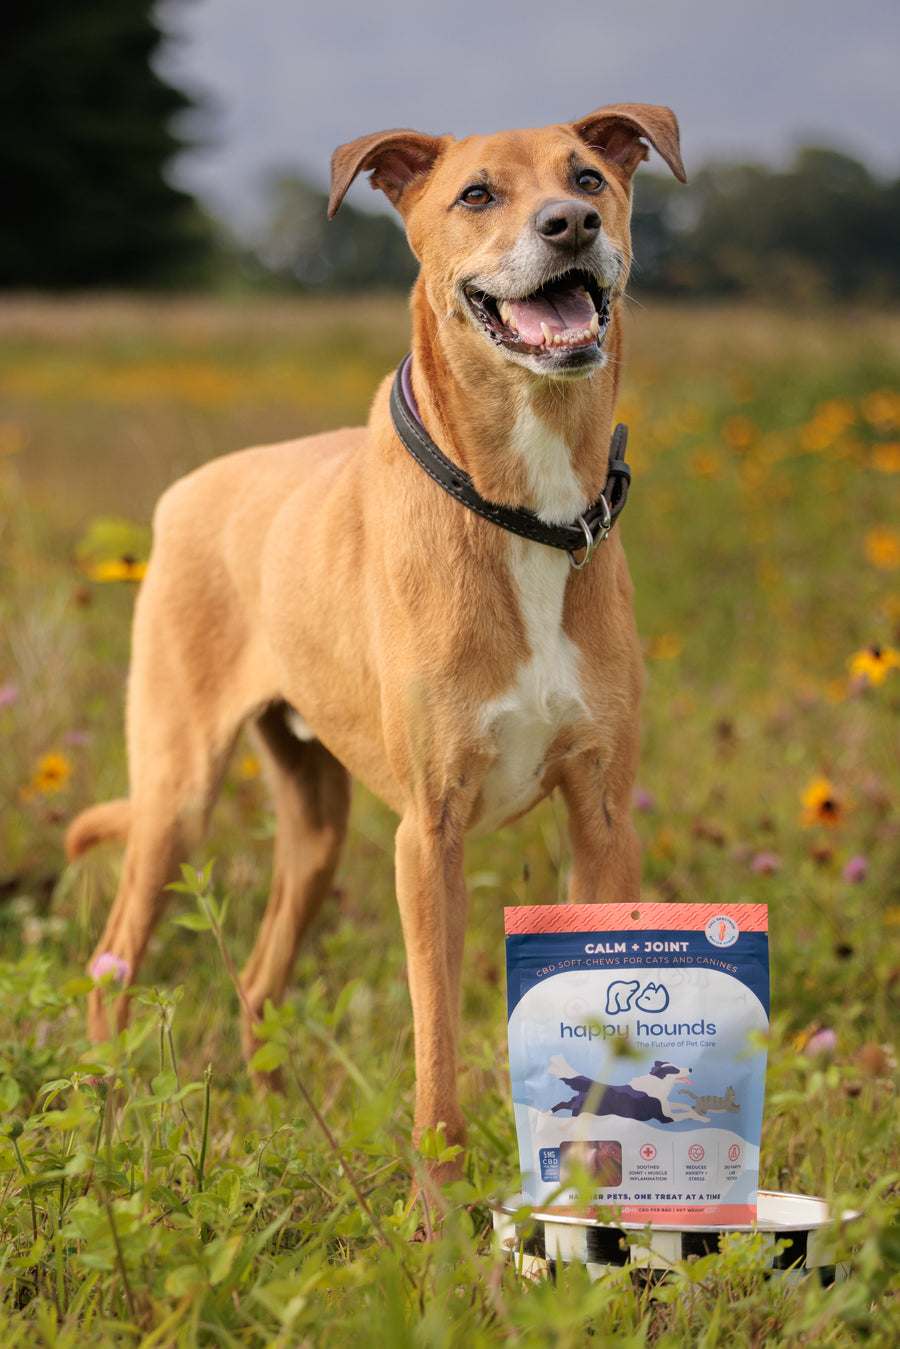 Happy-Hounds-CBD-dog-treats-for-hip-and-joint-pain-athritis-in-dogs-inflammation-dog-joint-pain-hip-dysplasia-in-dogs-senior-dogs